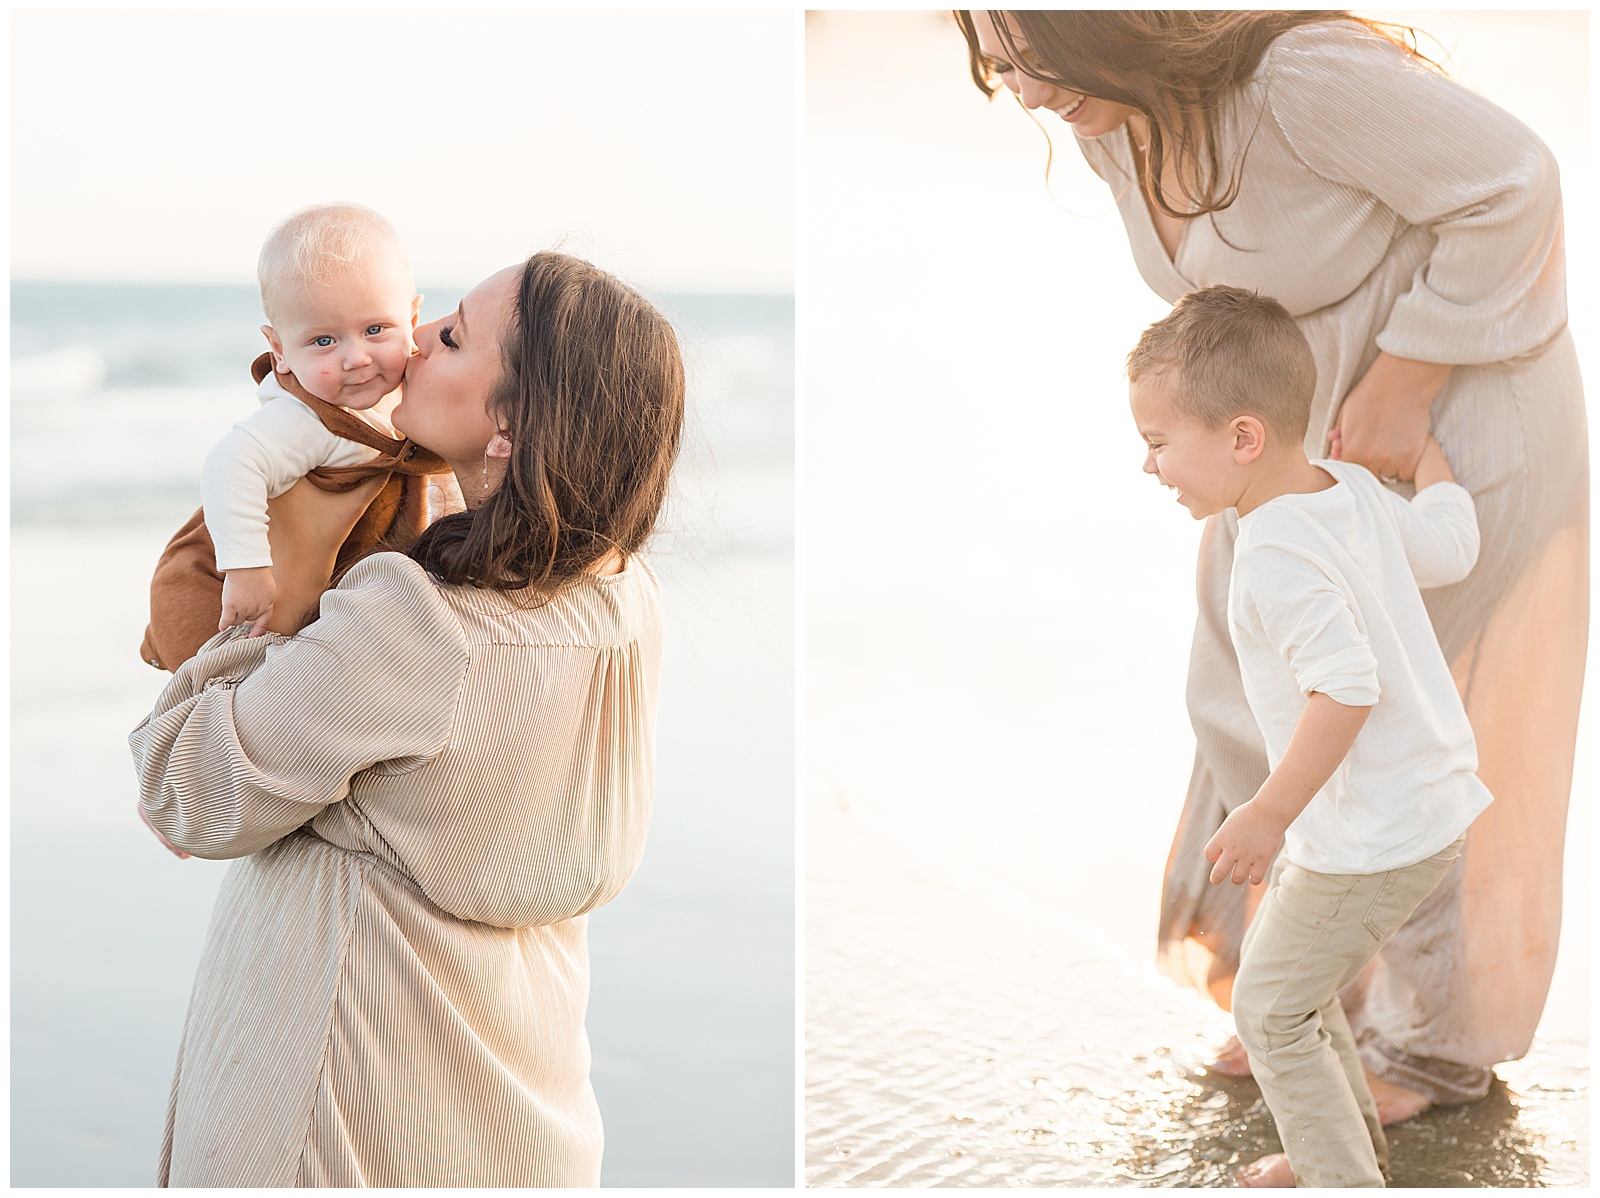 One picture has mom holding baby boy as she kisses him on the cheek on the beaches of Charleston. The other image has mom holding oldest sons hand as they put their toes in the ocean waters.